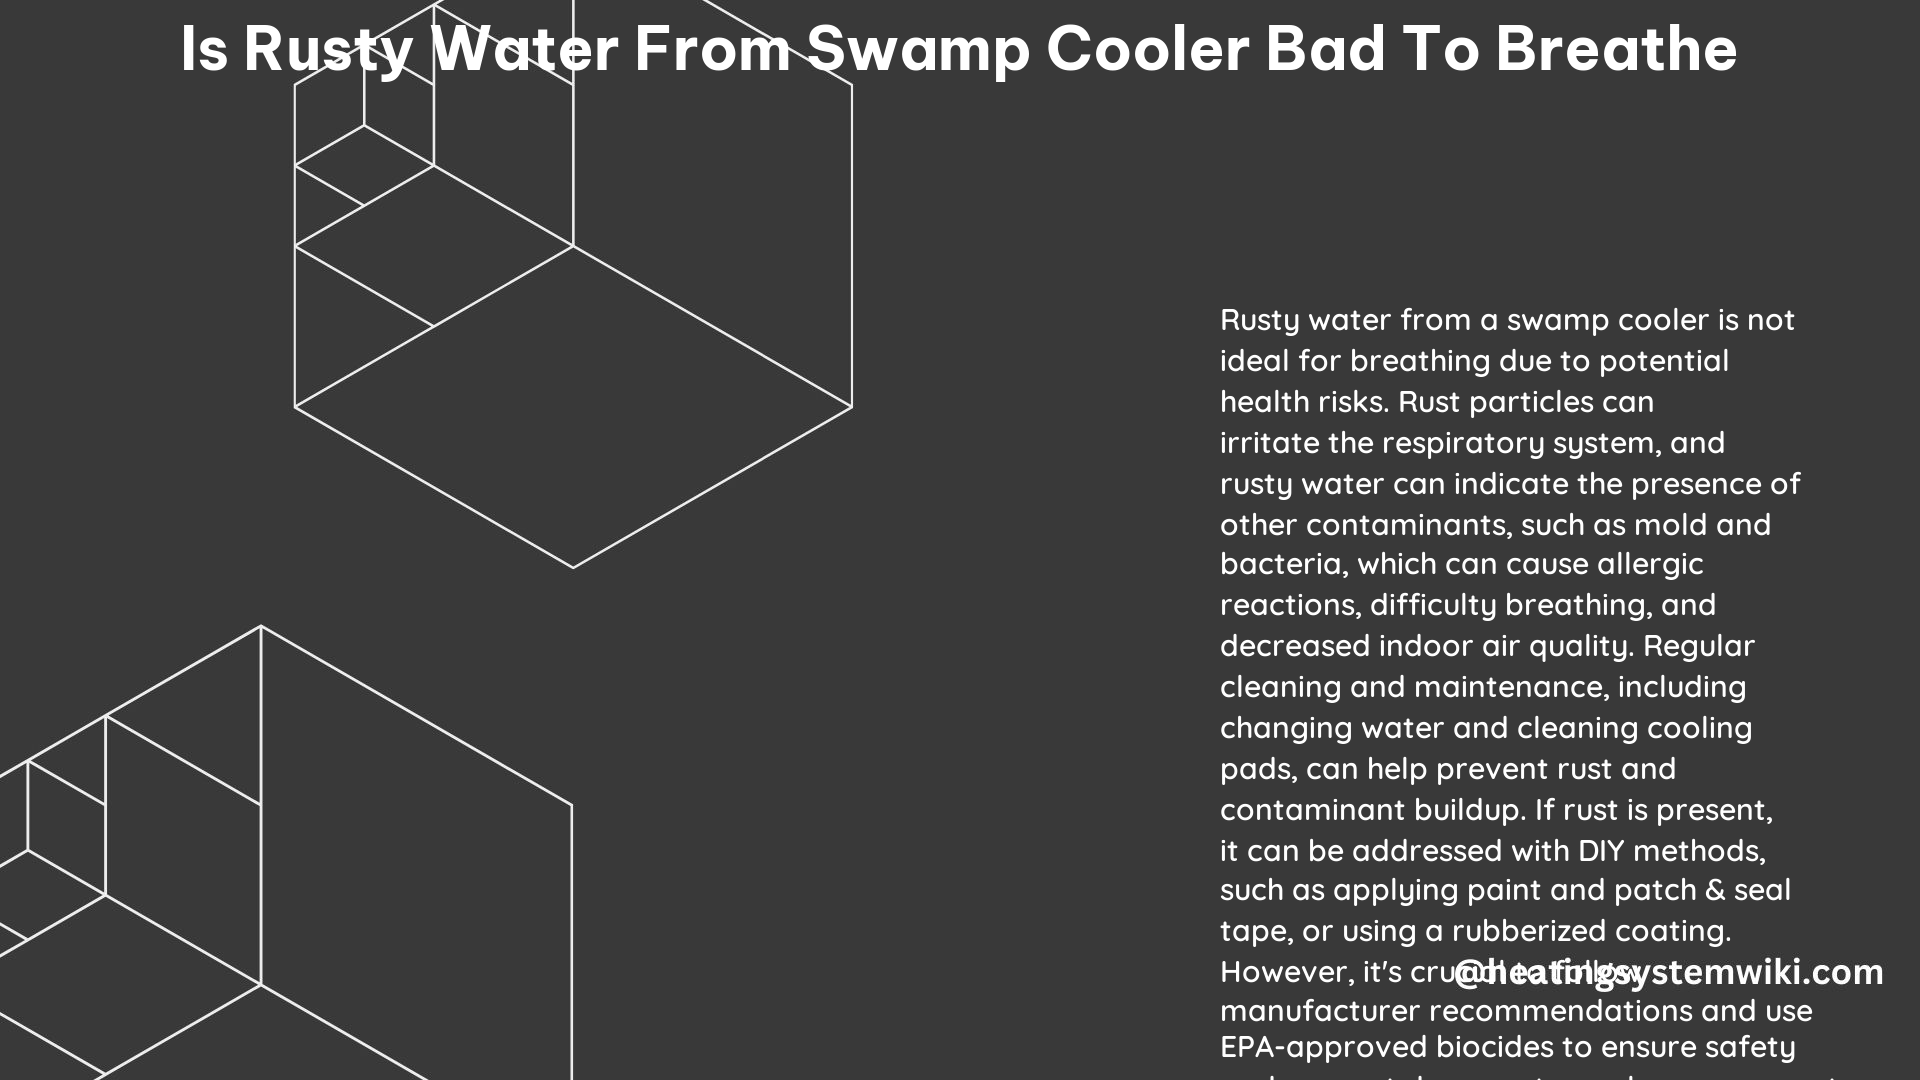 Is Rusty Water From Swamp Cooler Bad to Breathe